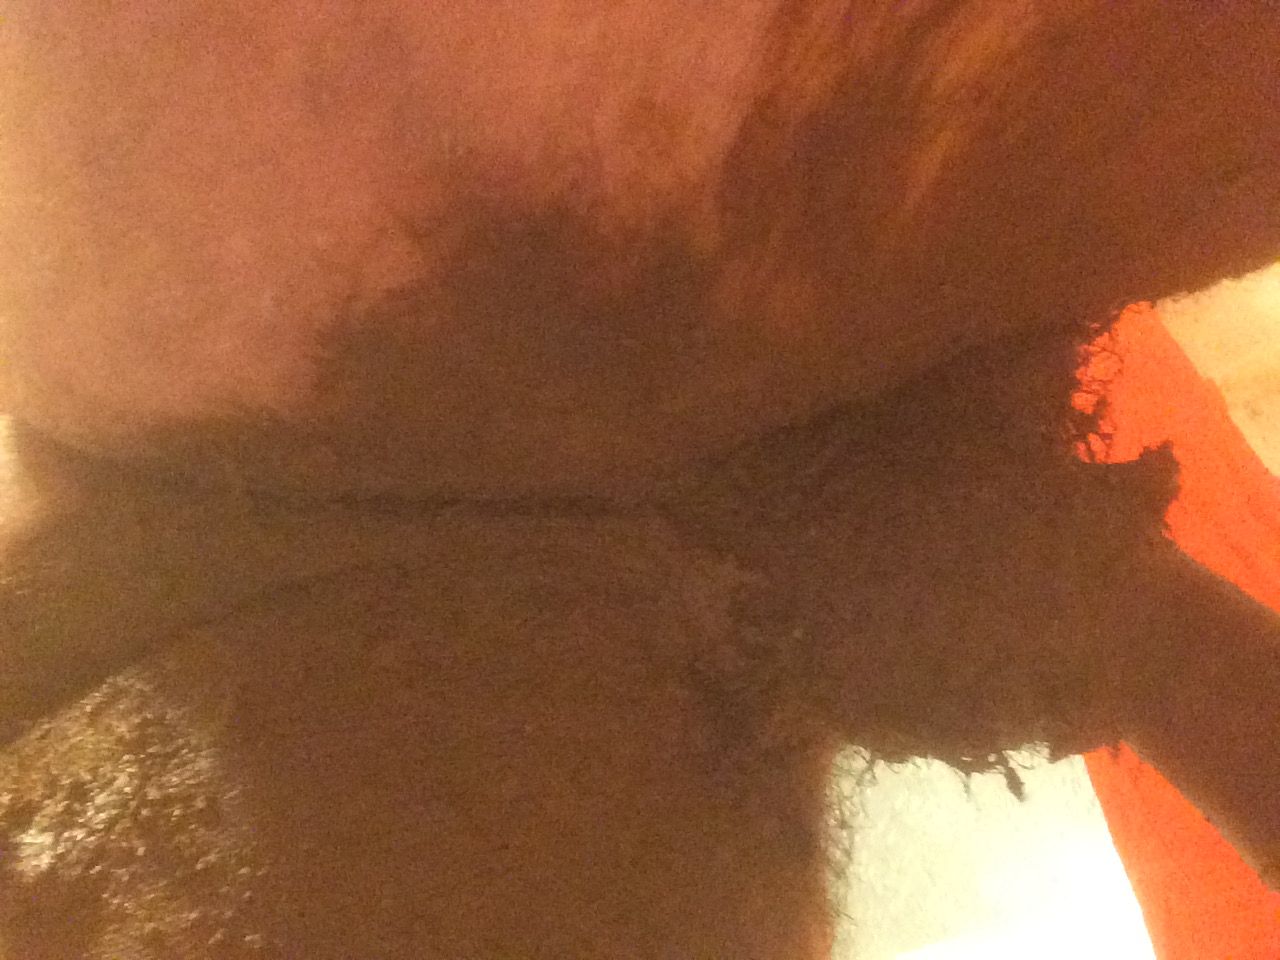 Shit smeared cock and ass